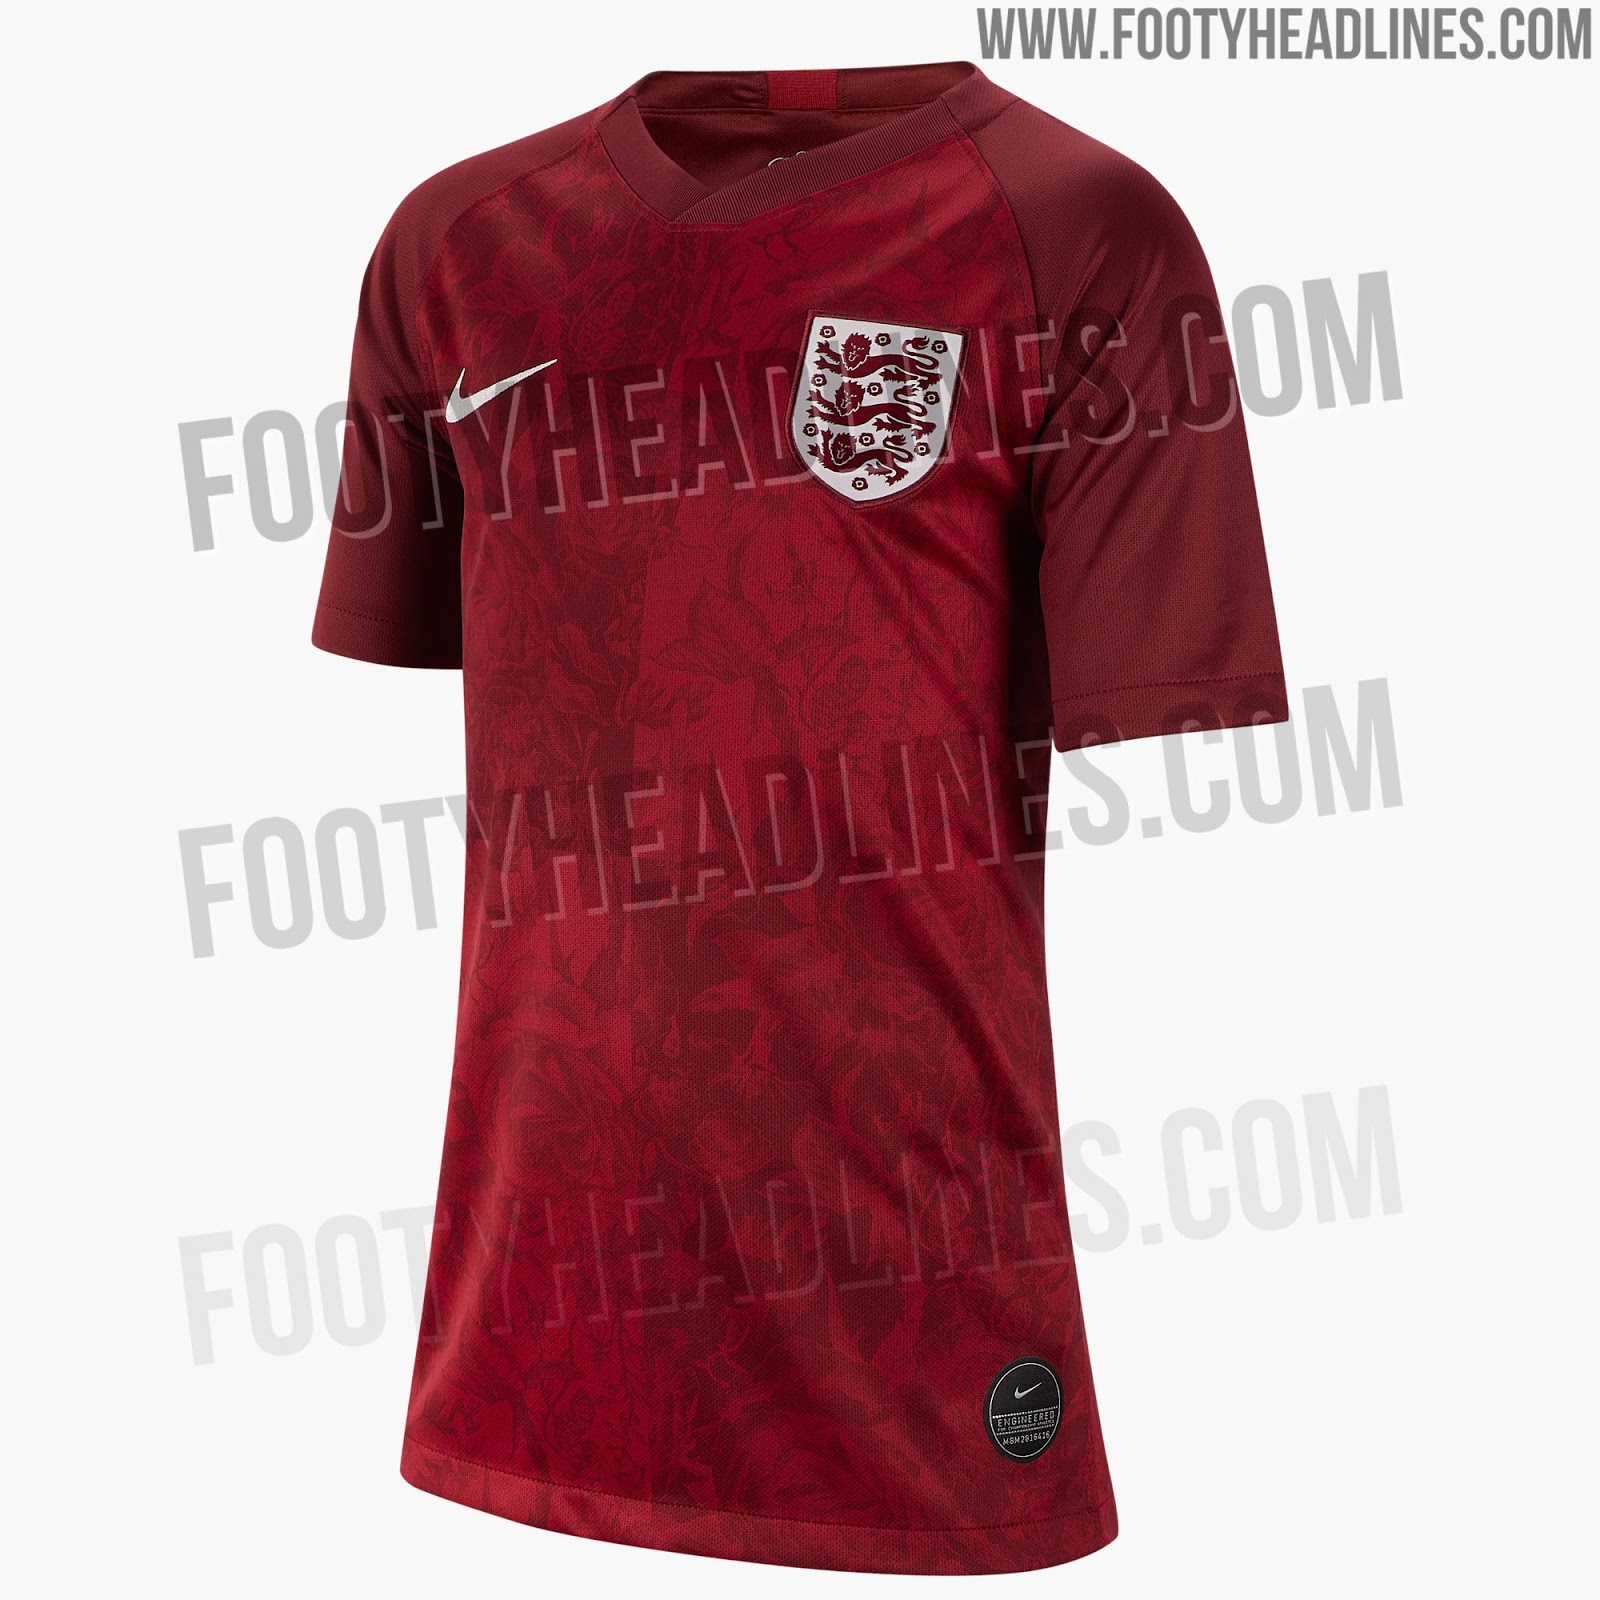 Which Are Better? Nike England 2018 Men's vs 2019 Women's World Cup